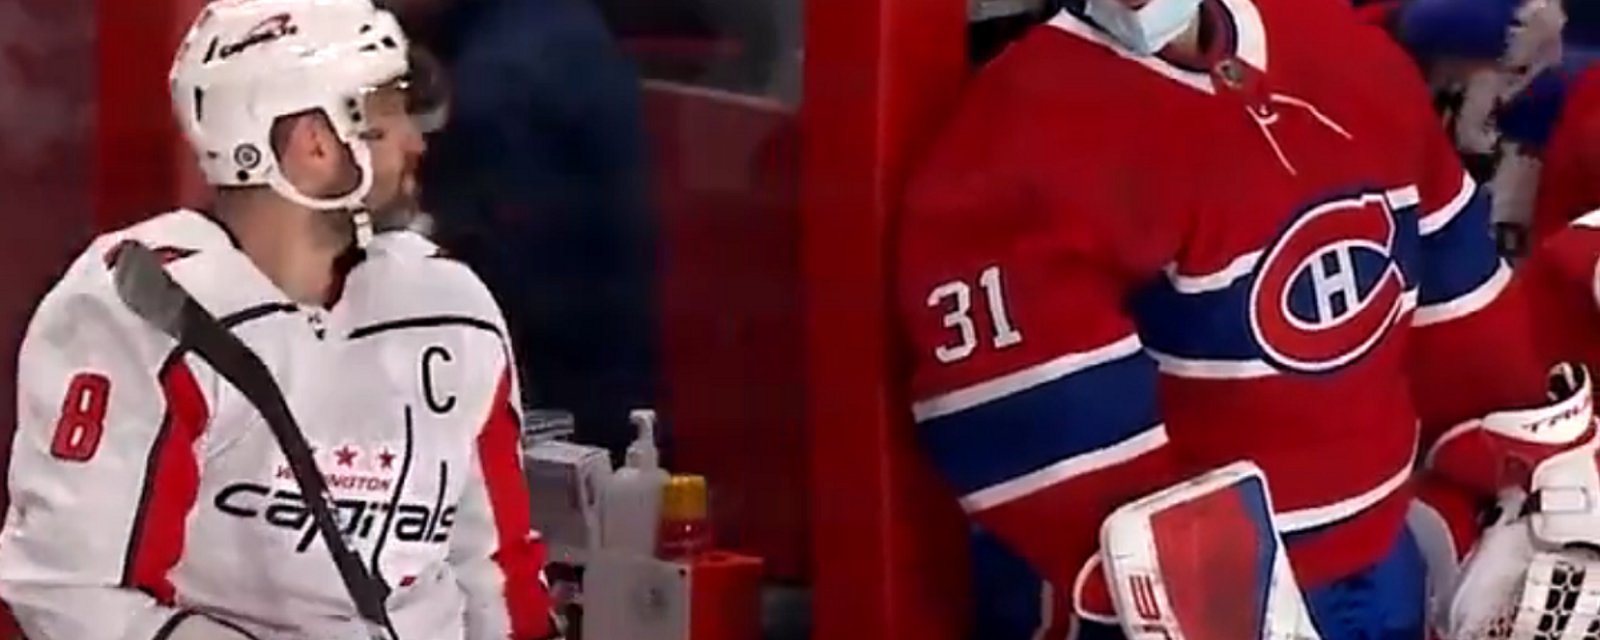 Alex Ovechkin welcomes Carey Price back to the NHL.